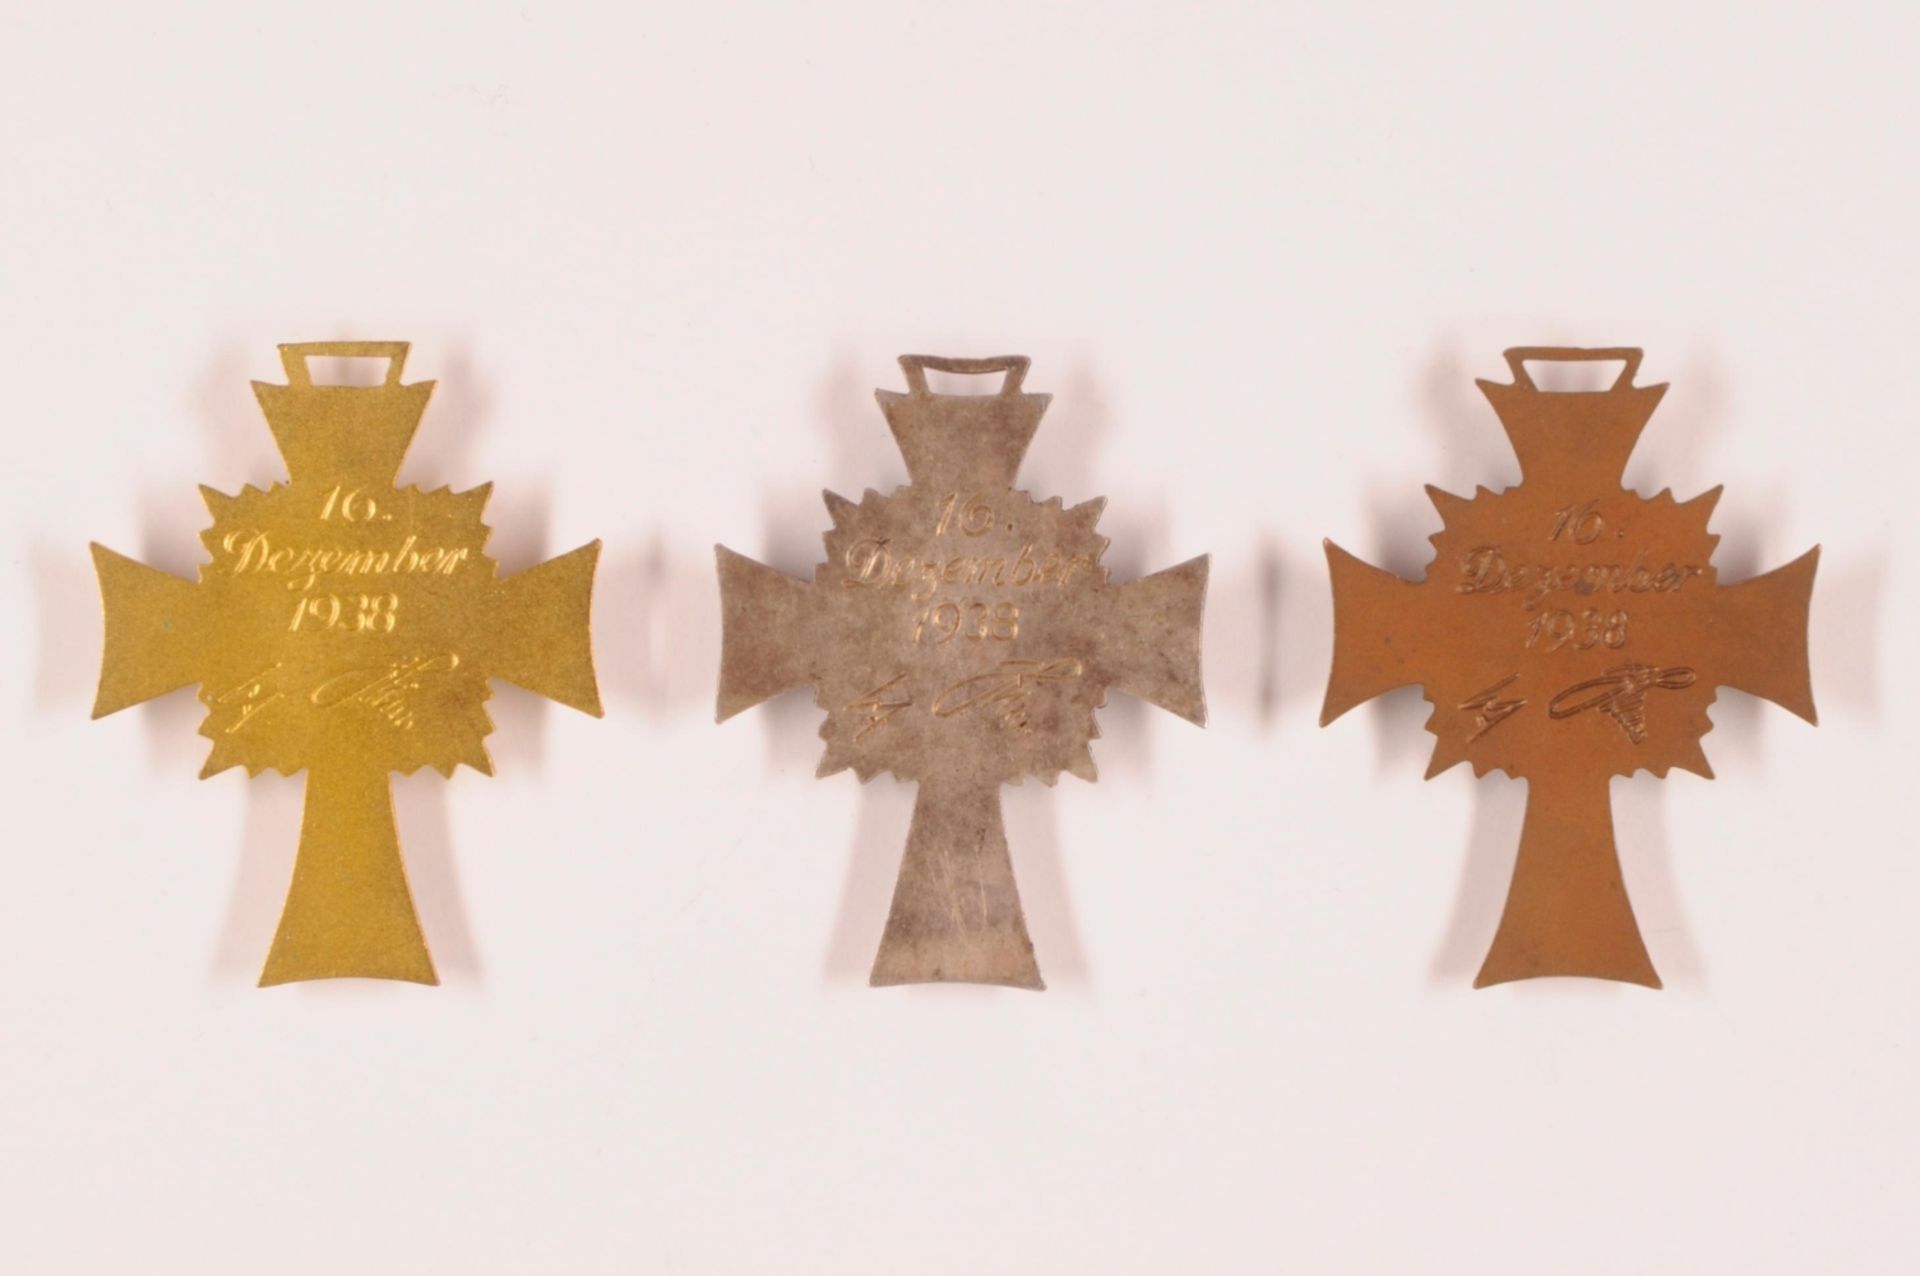 3 x cross of honor of the German mother, 1. Step, 2. Form, 16. December 1938, in gold, in silver and - Image 2 of 2